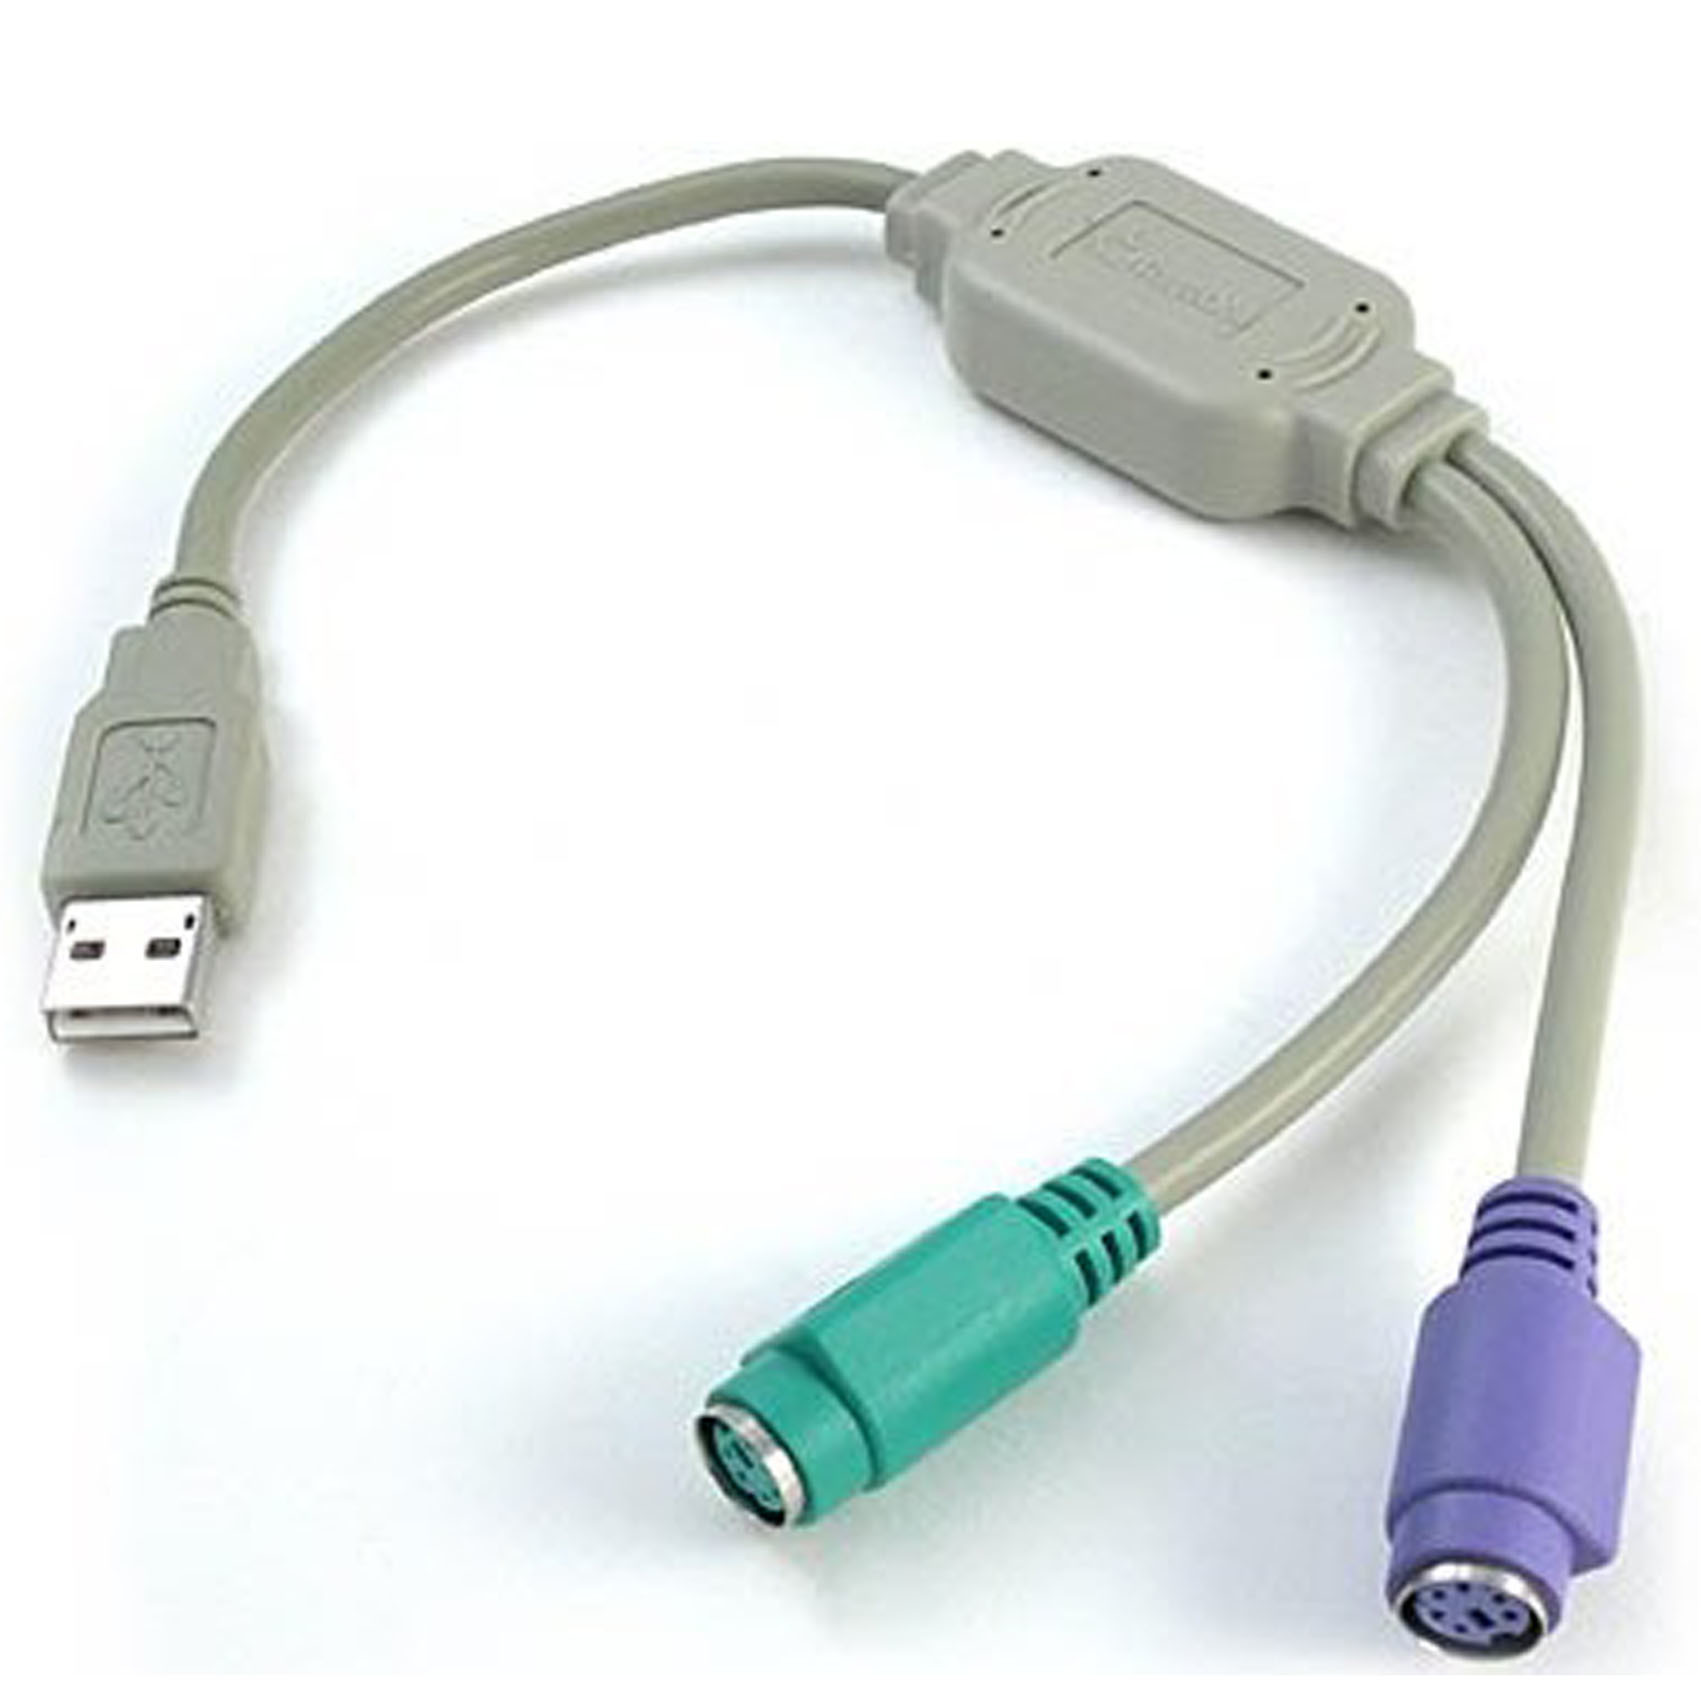 USB to PS2 Cable